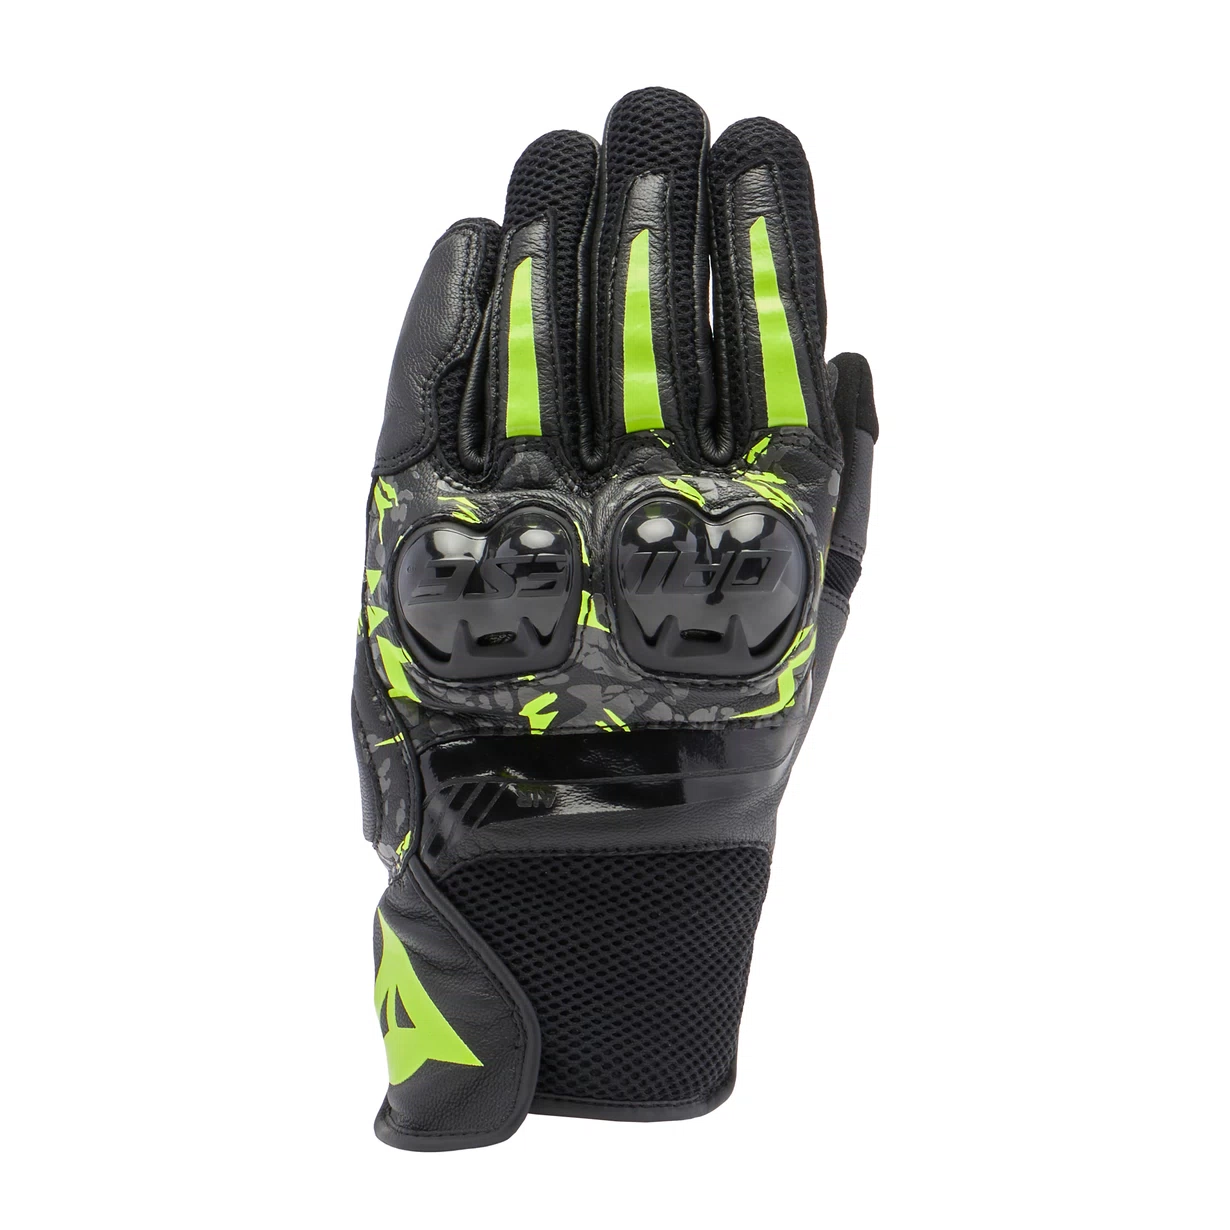 GUANTES DAINESE MIG 3 unisex black/anthacite/yellow fluo